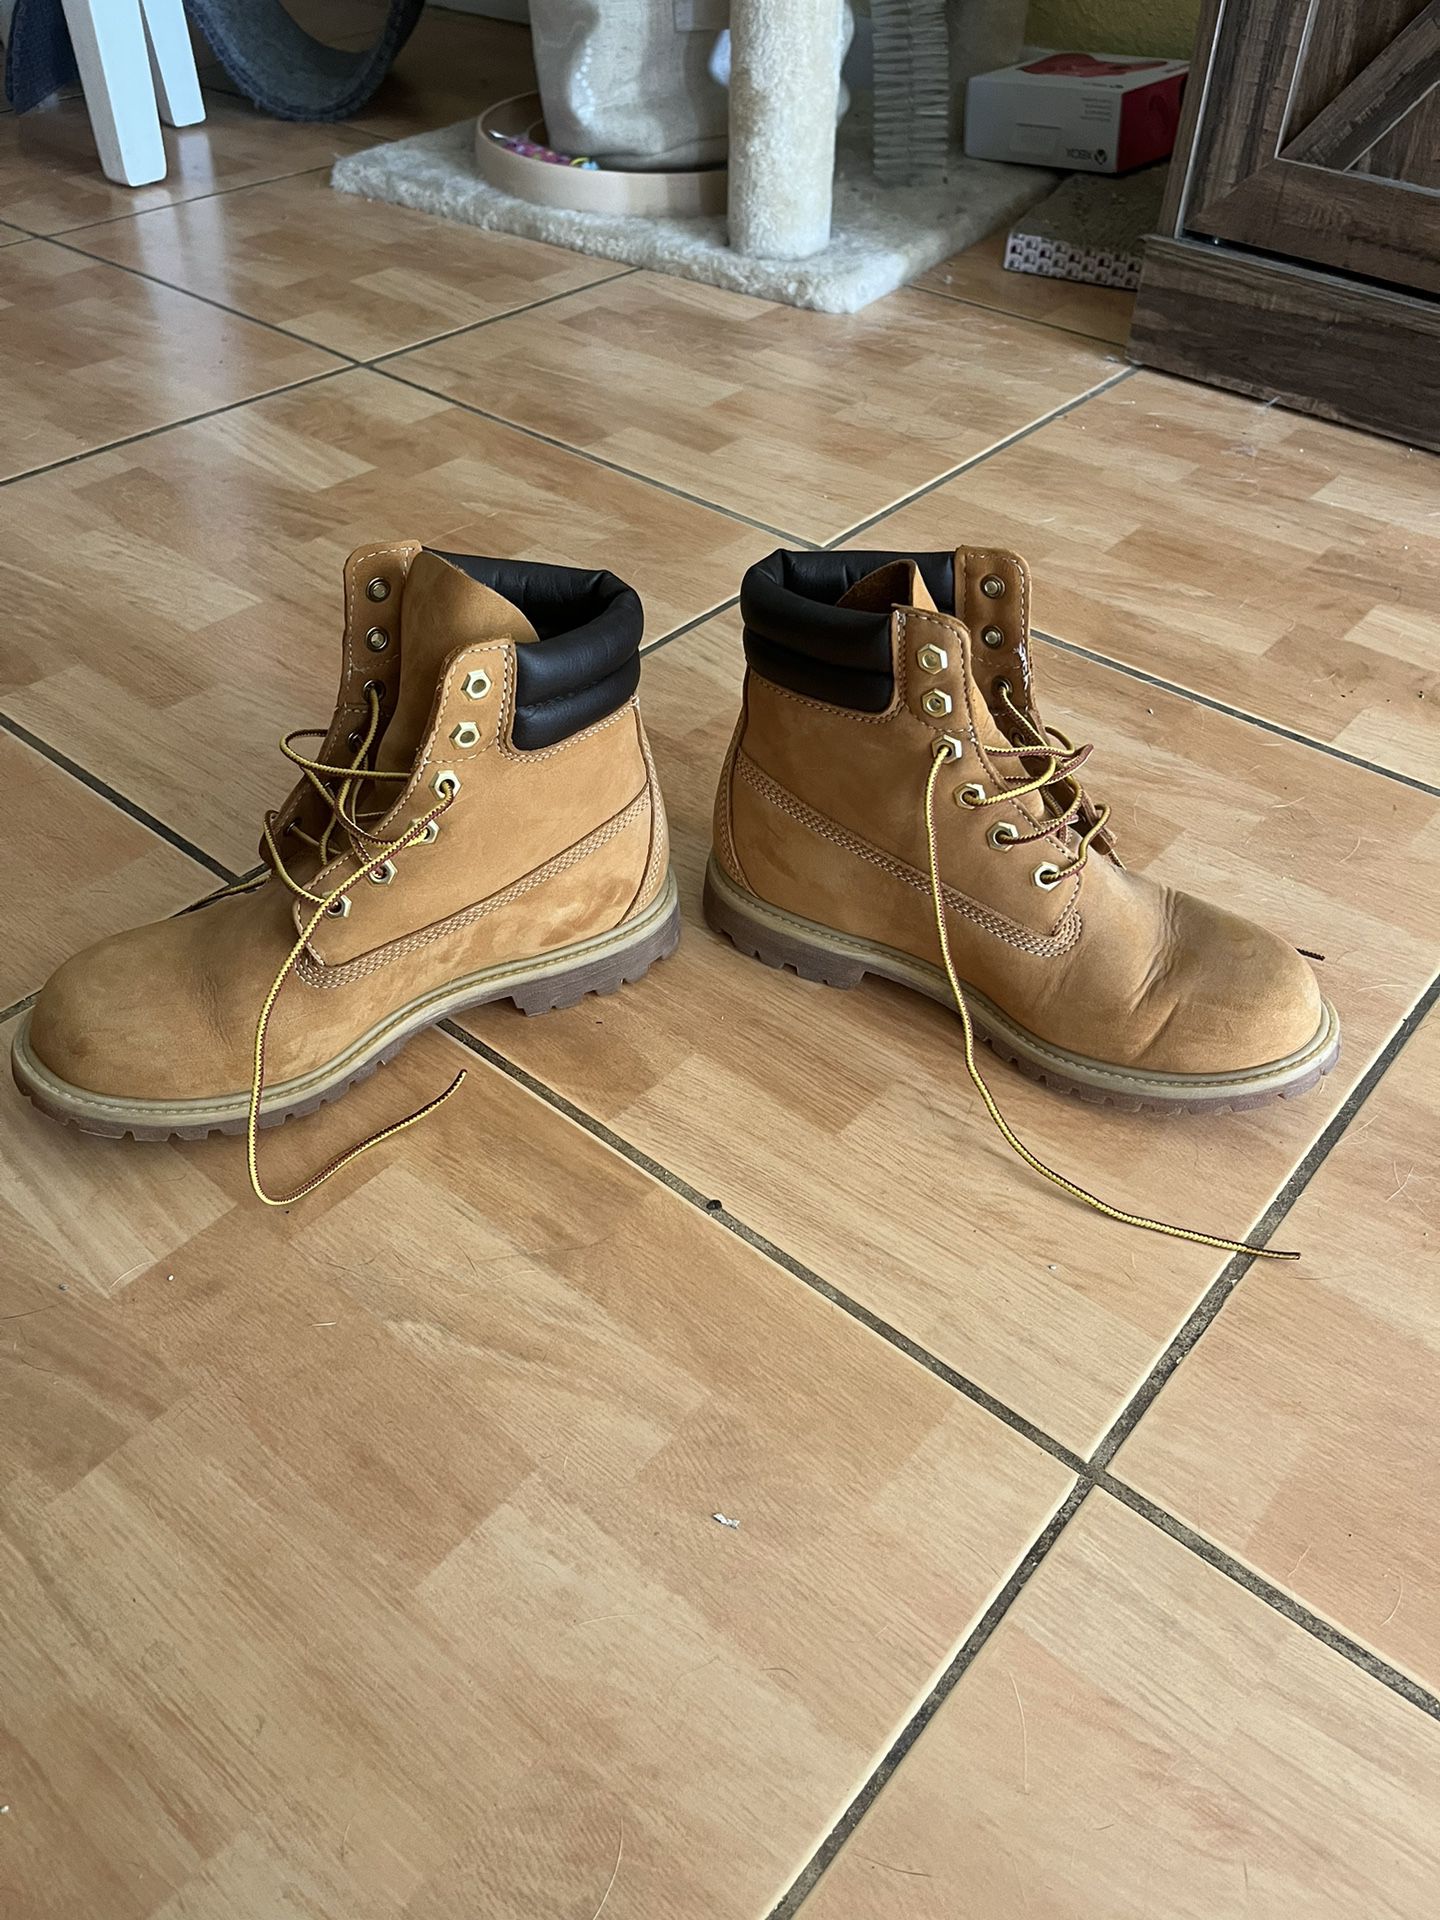 Timberland Boots Woman’s 8.5 